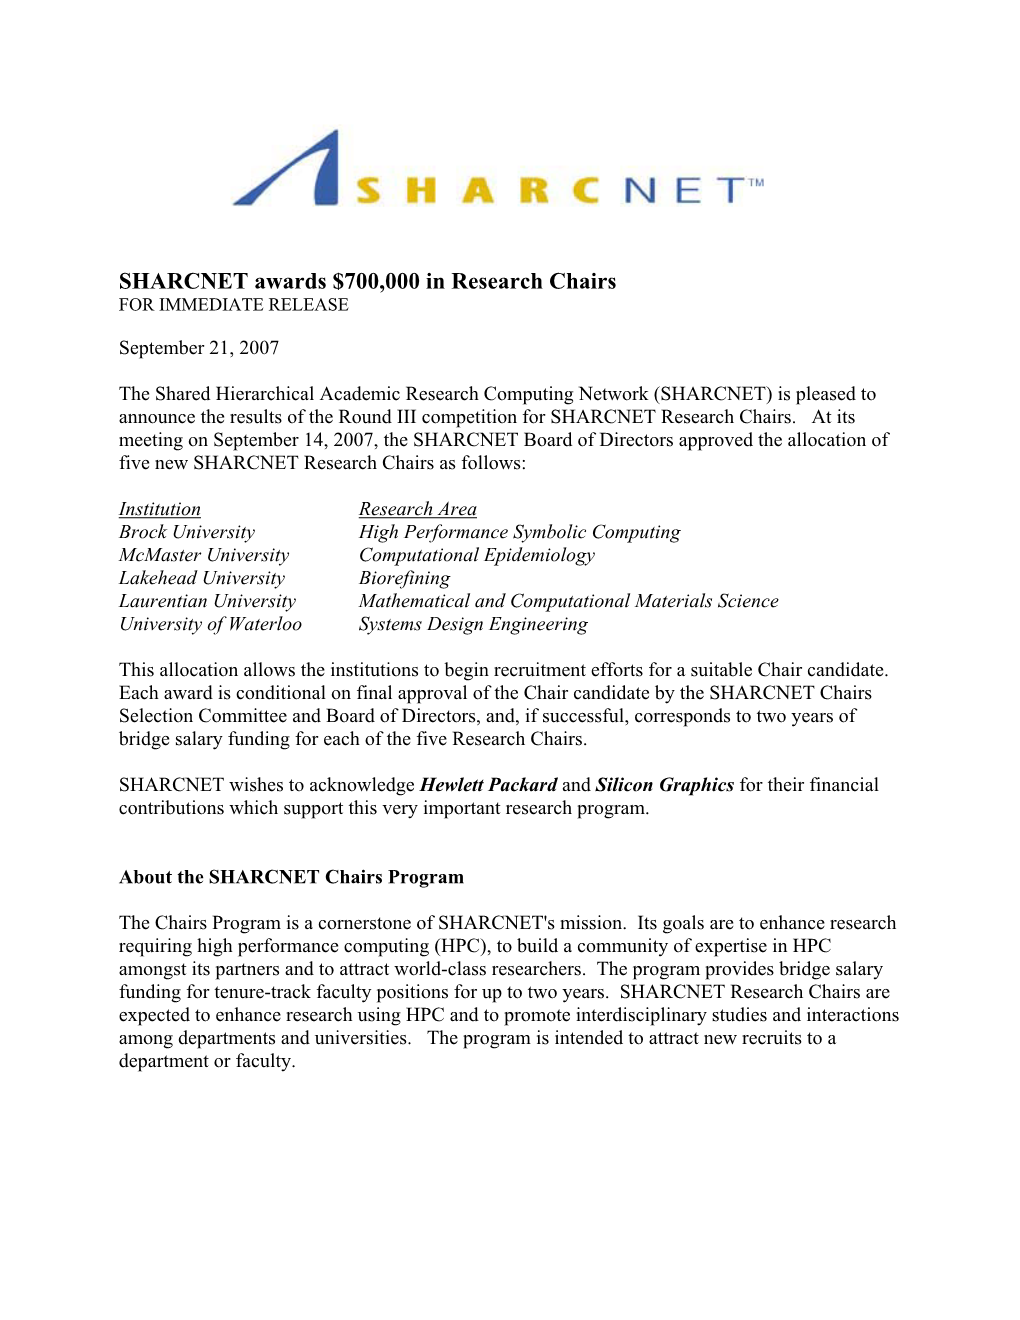 SHARCNET Awards $700,000 in Research Chairs for IMMEDIATE RELEASE